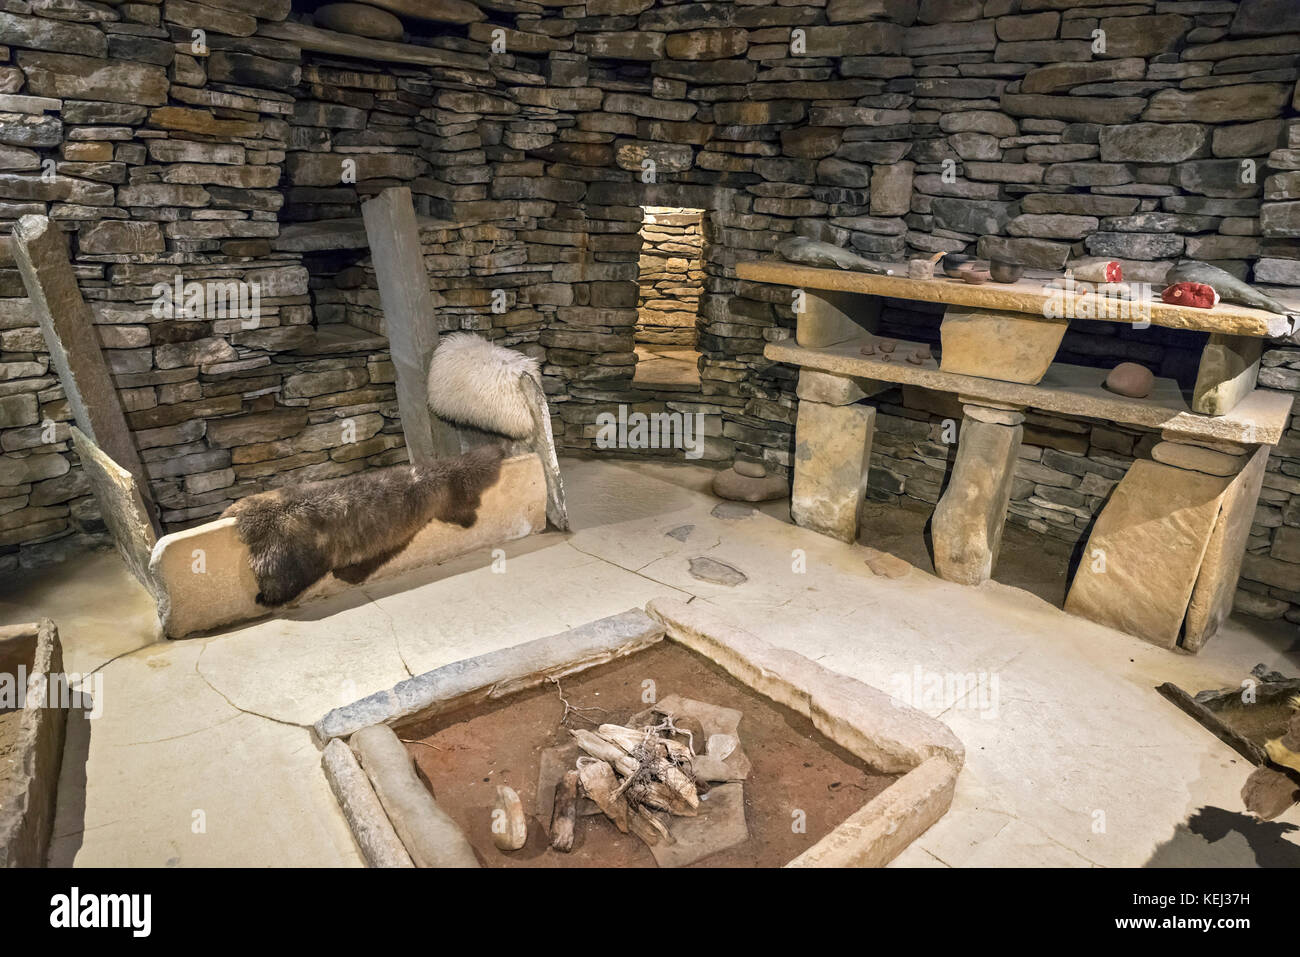 Replica of the interior of a stone house at the Neolithic settlement of Skara Brae, Mainland, Orkney, Scotland, UK Stock Photo